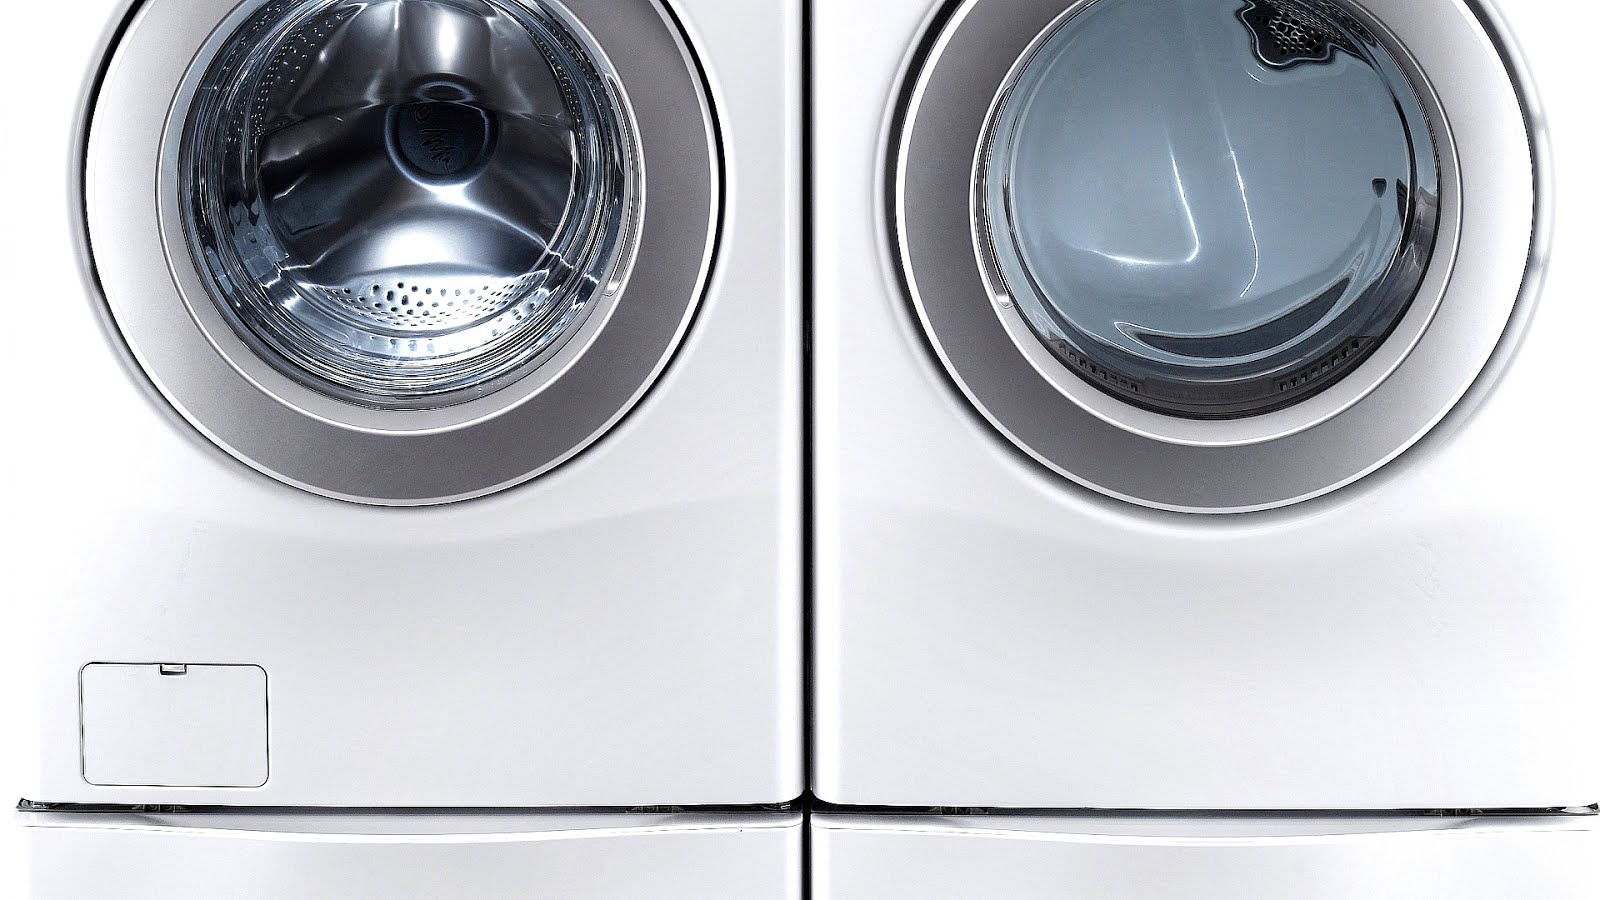 washer-and-dryer-energy-star-energy-choices